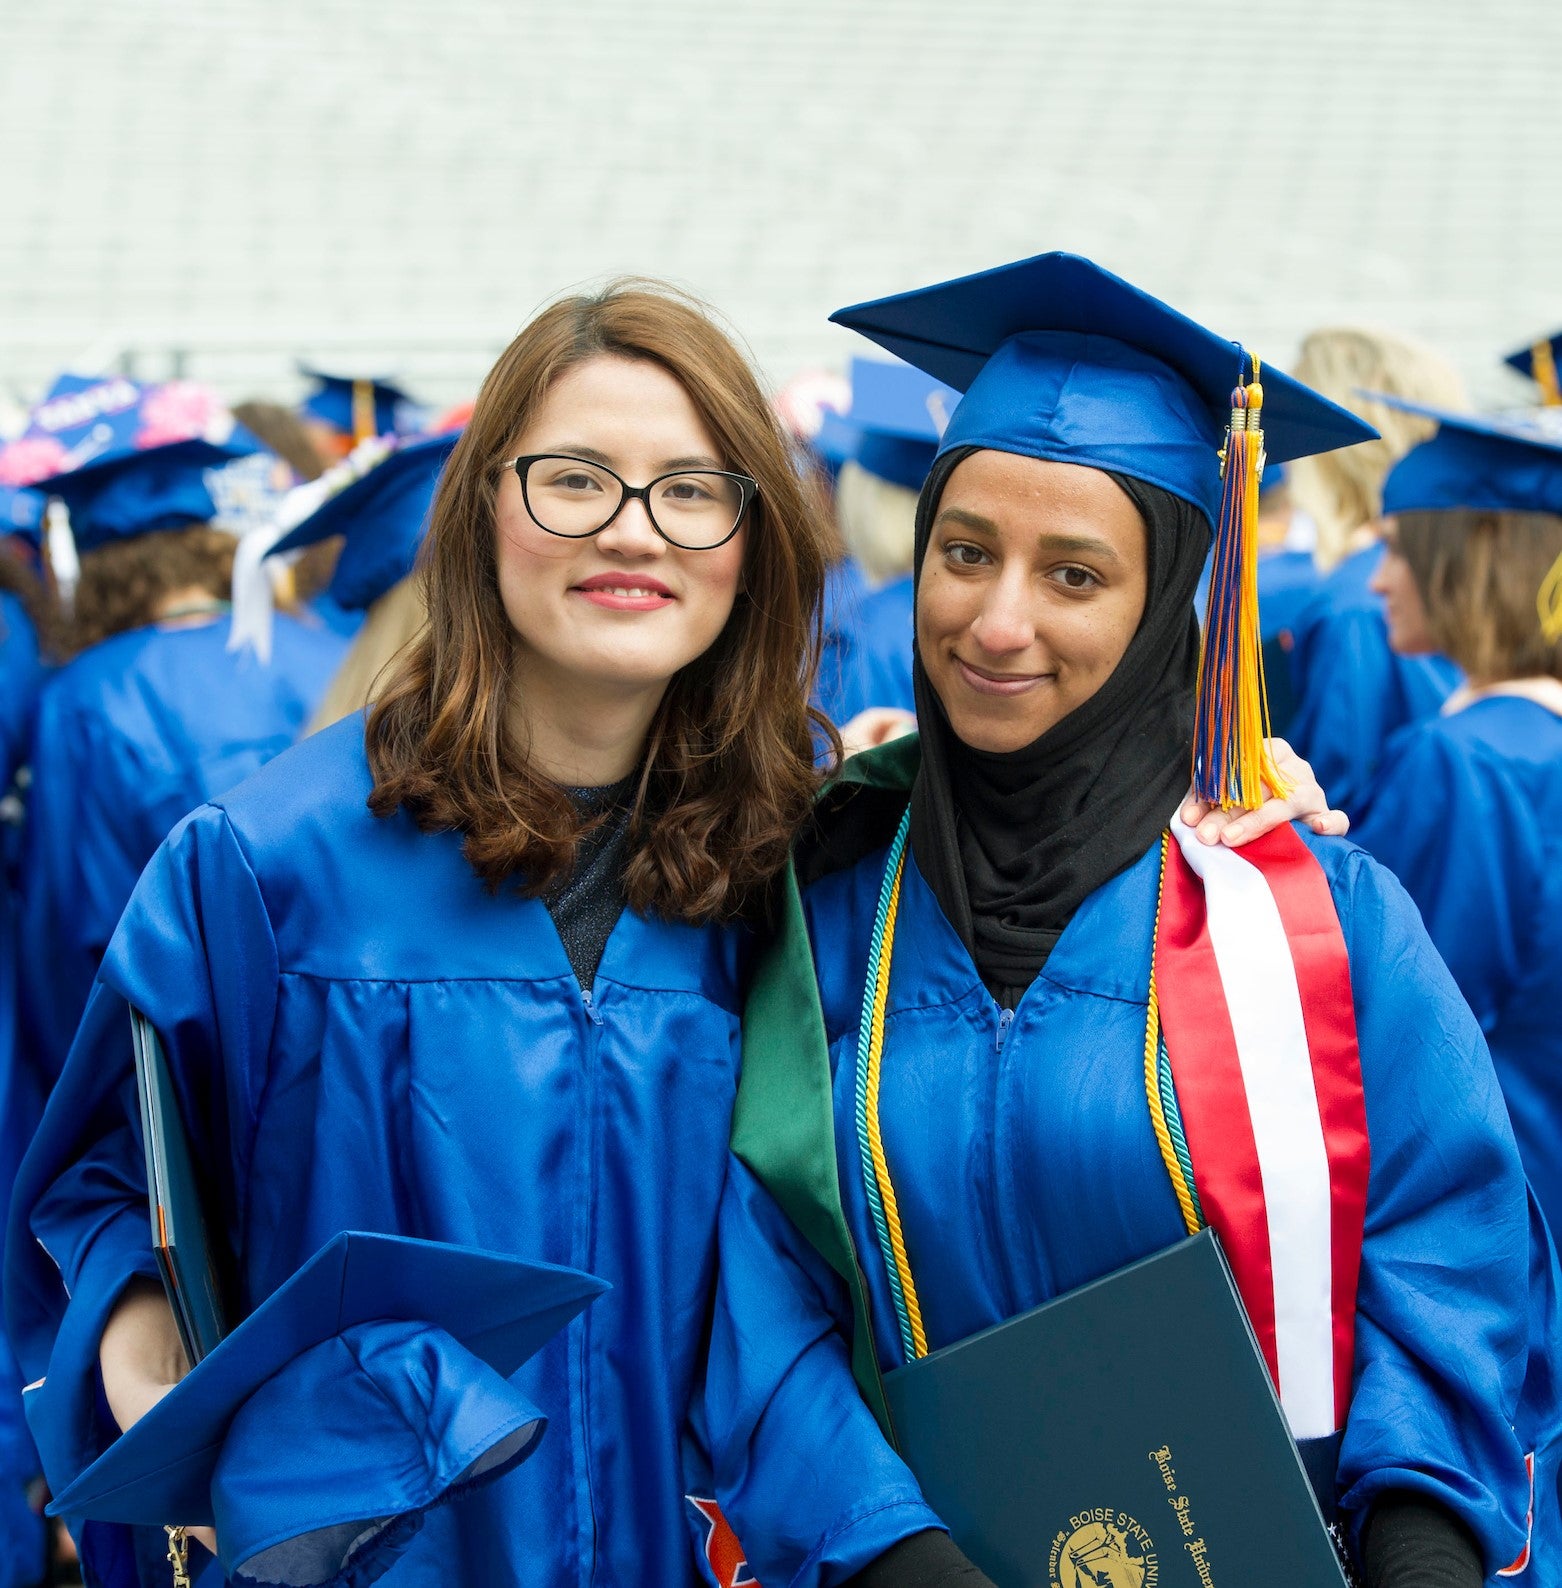 Two students at graduation